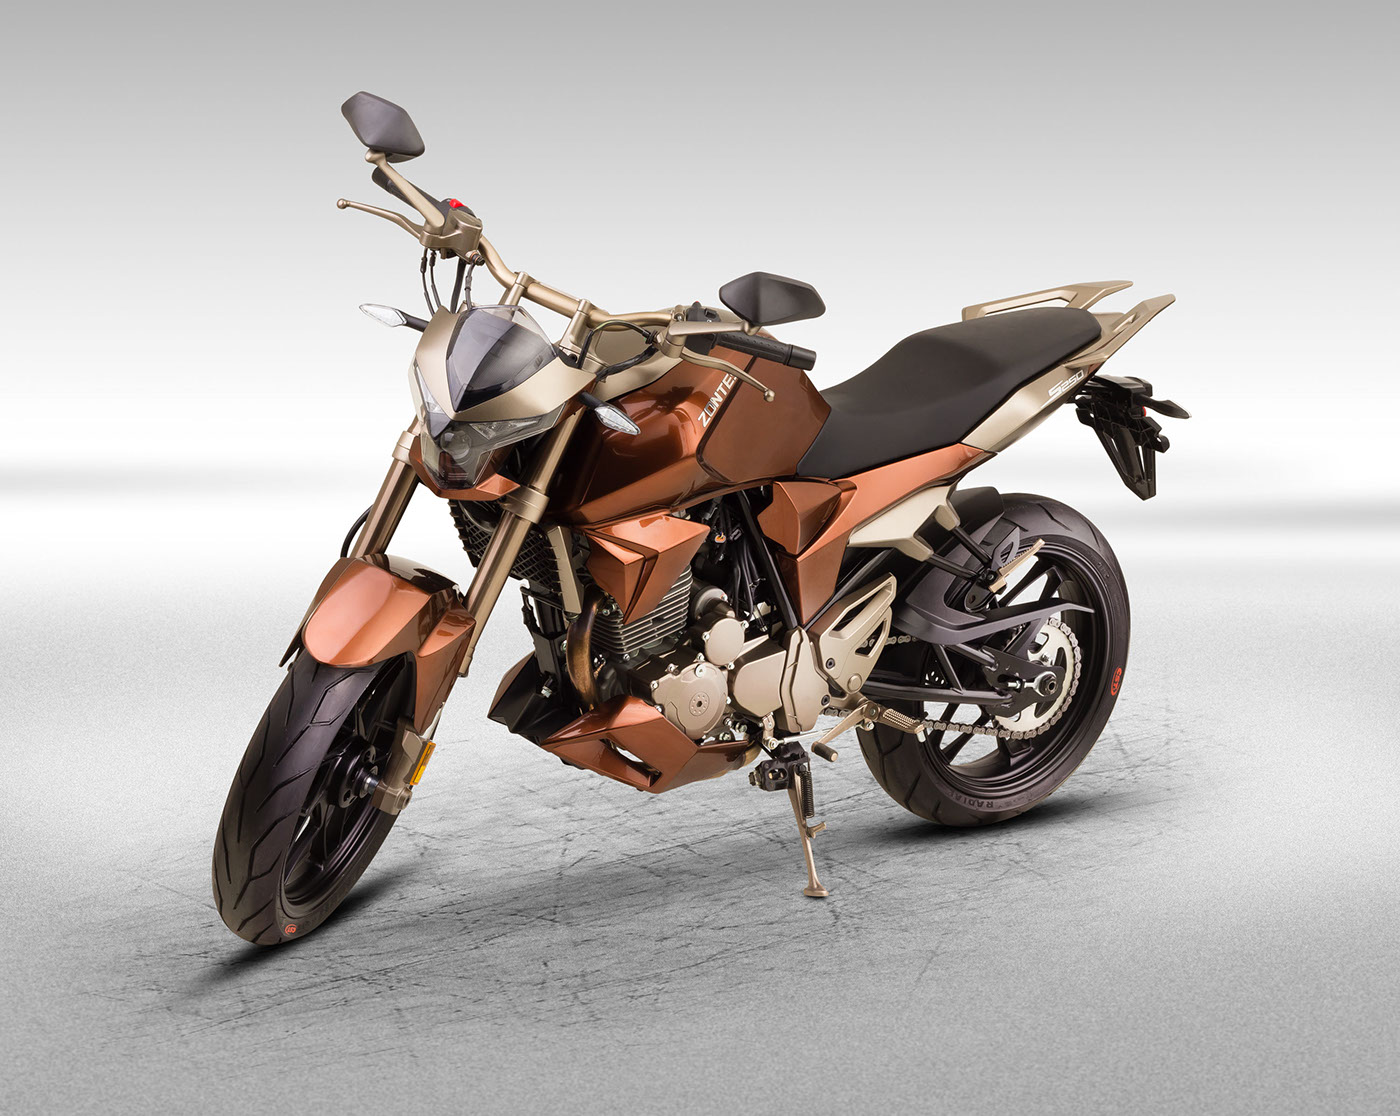 motorcycle bikes Composite Image Composite Product Photography motorcycle photography